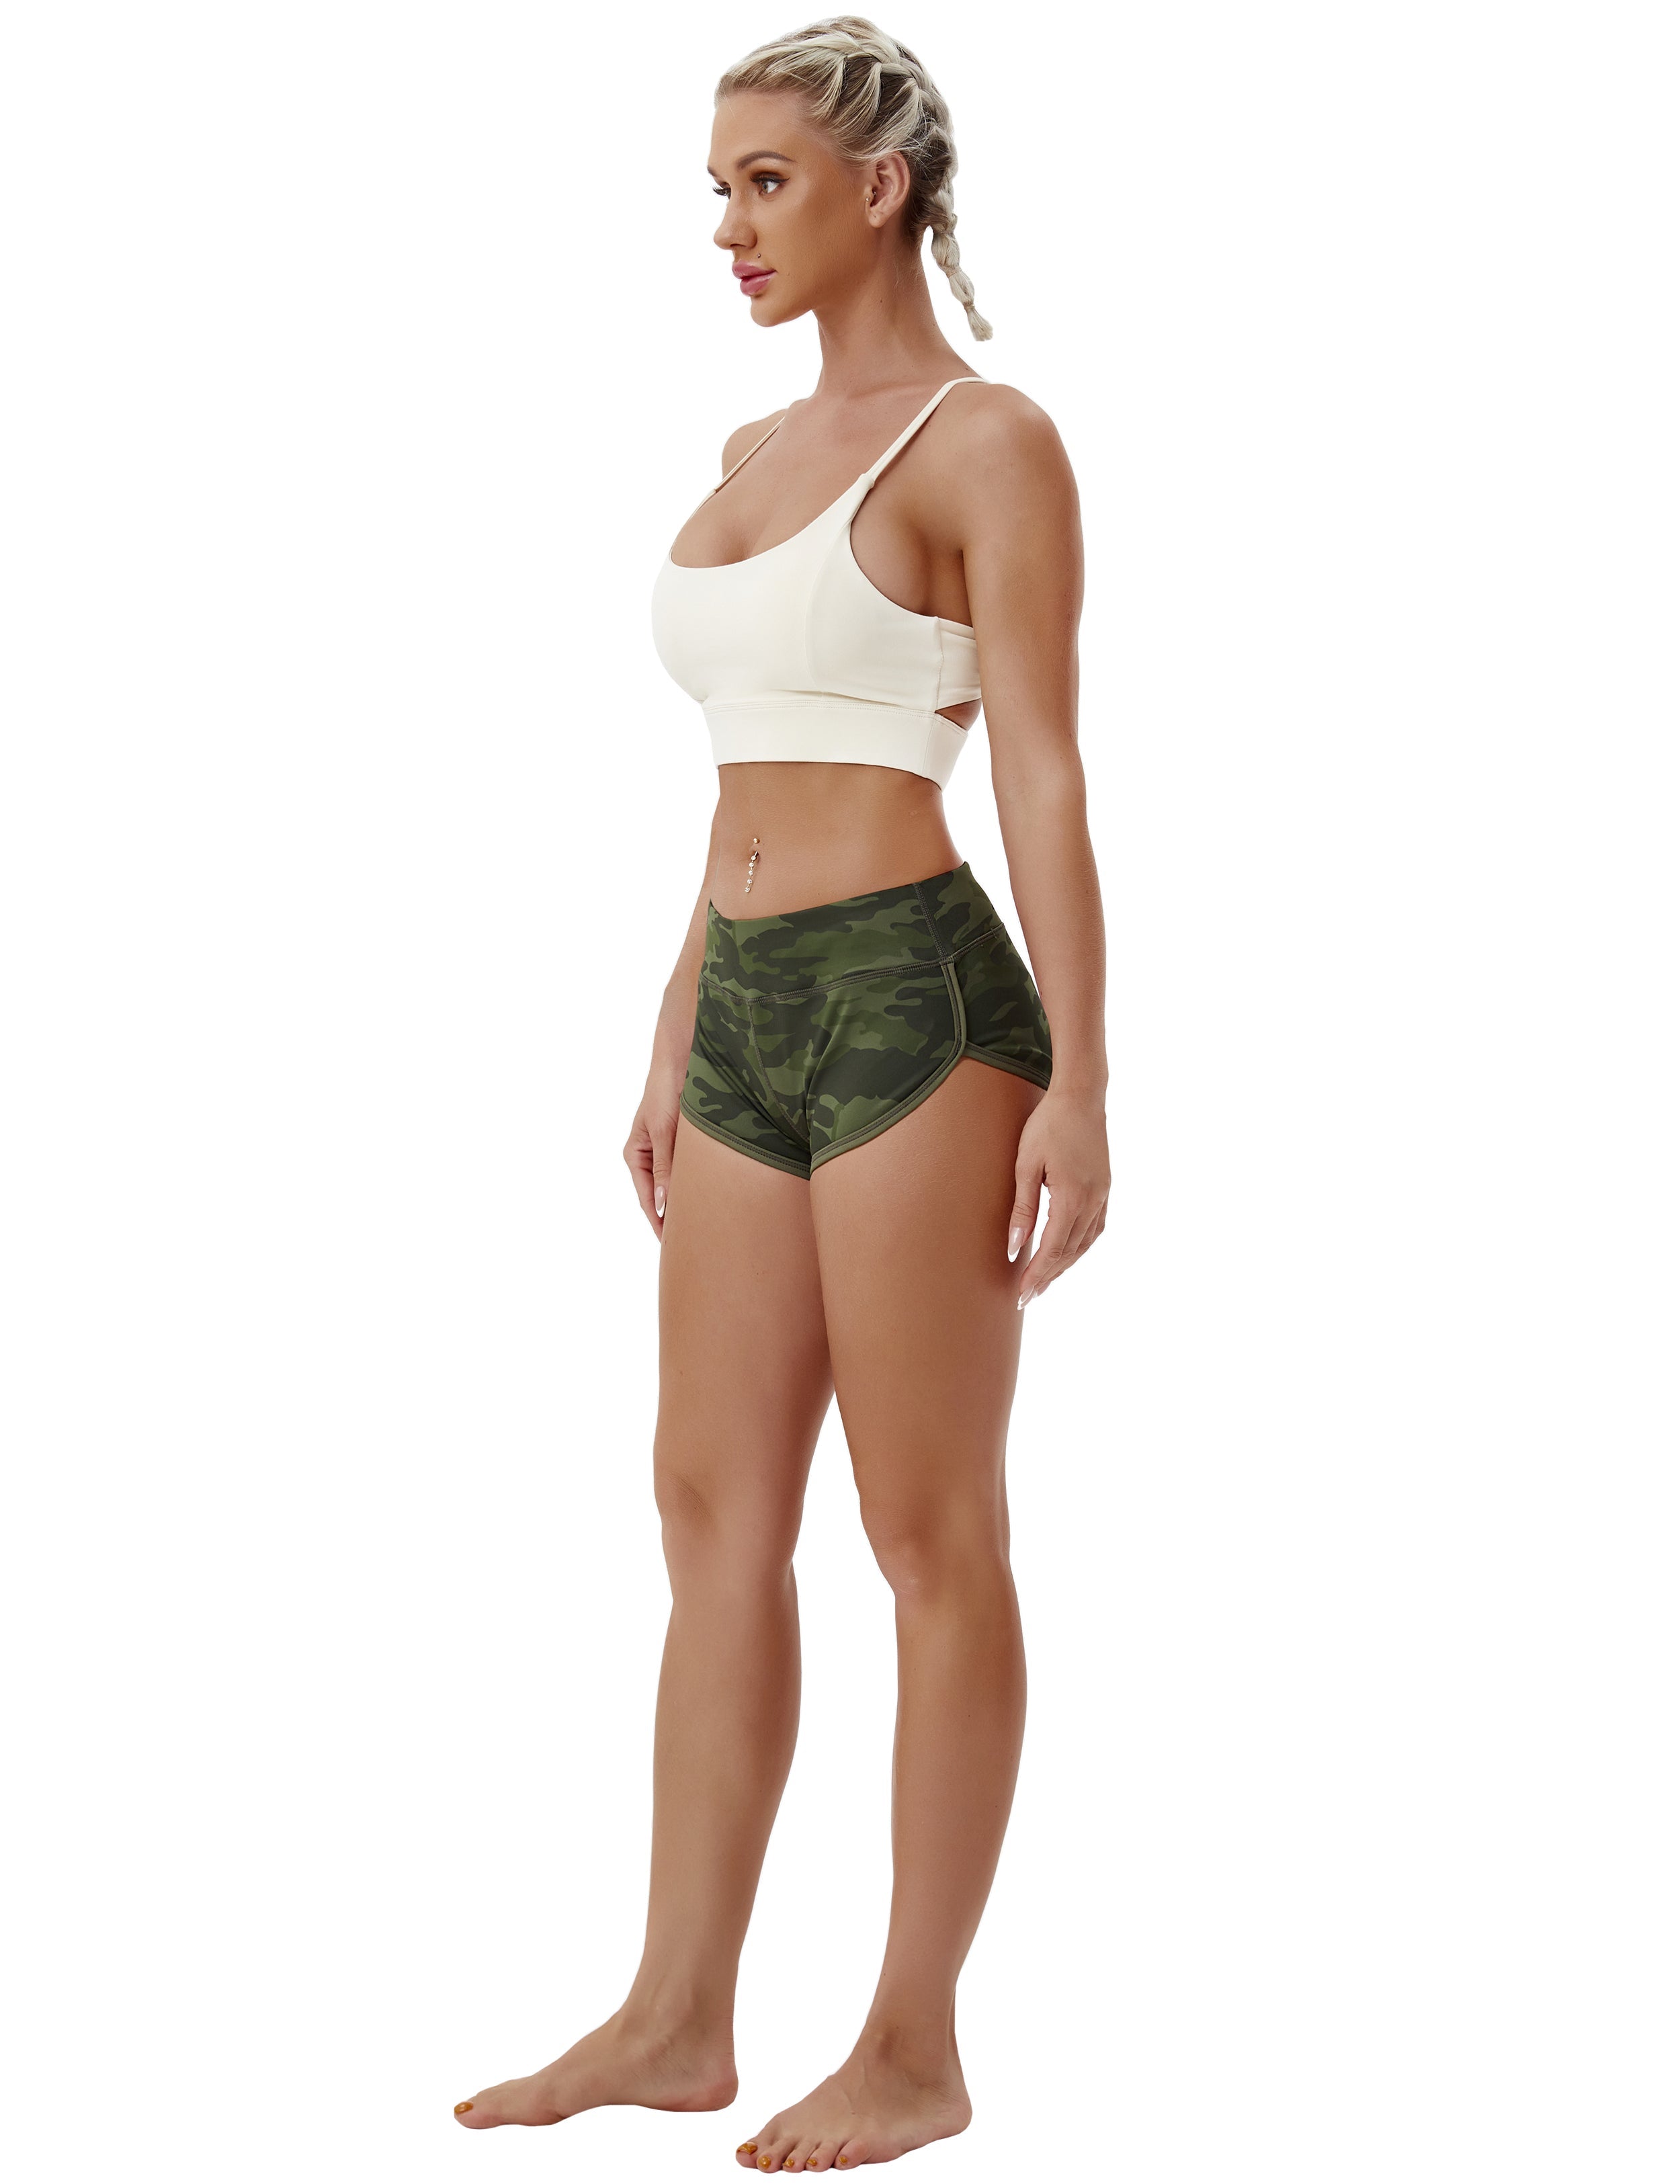 Printed Booty Jogging Shorts green camo Sleek, soft, smooth and totally comfortable: our newest sexy style is here. Softest-ever fabric High elasticity High density 4-way stretch Fabric doesn't attract lint easily No see-through Moisture-wicking Machine wash 78% Polyester, 22% Spandex